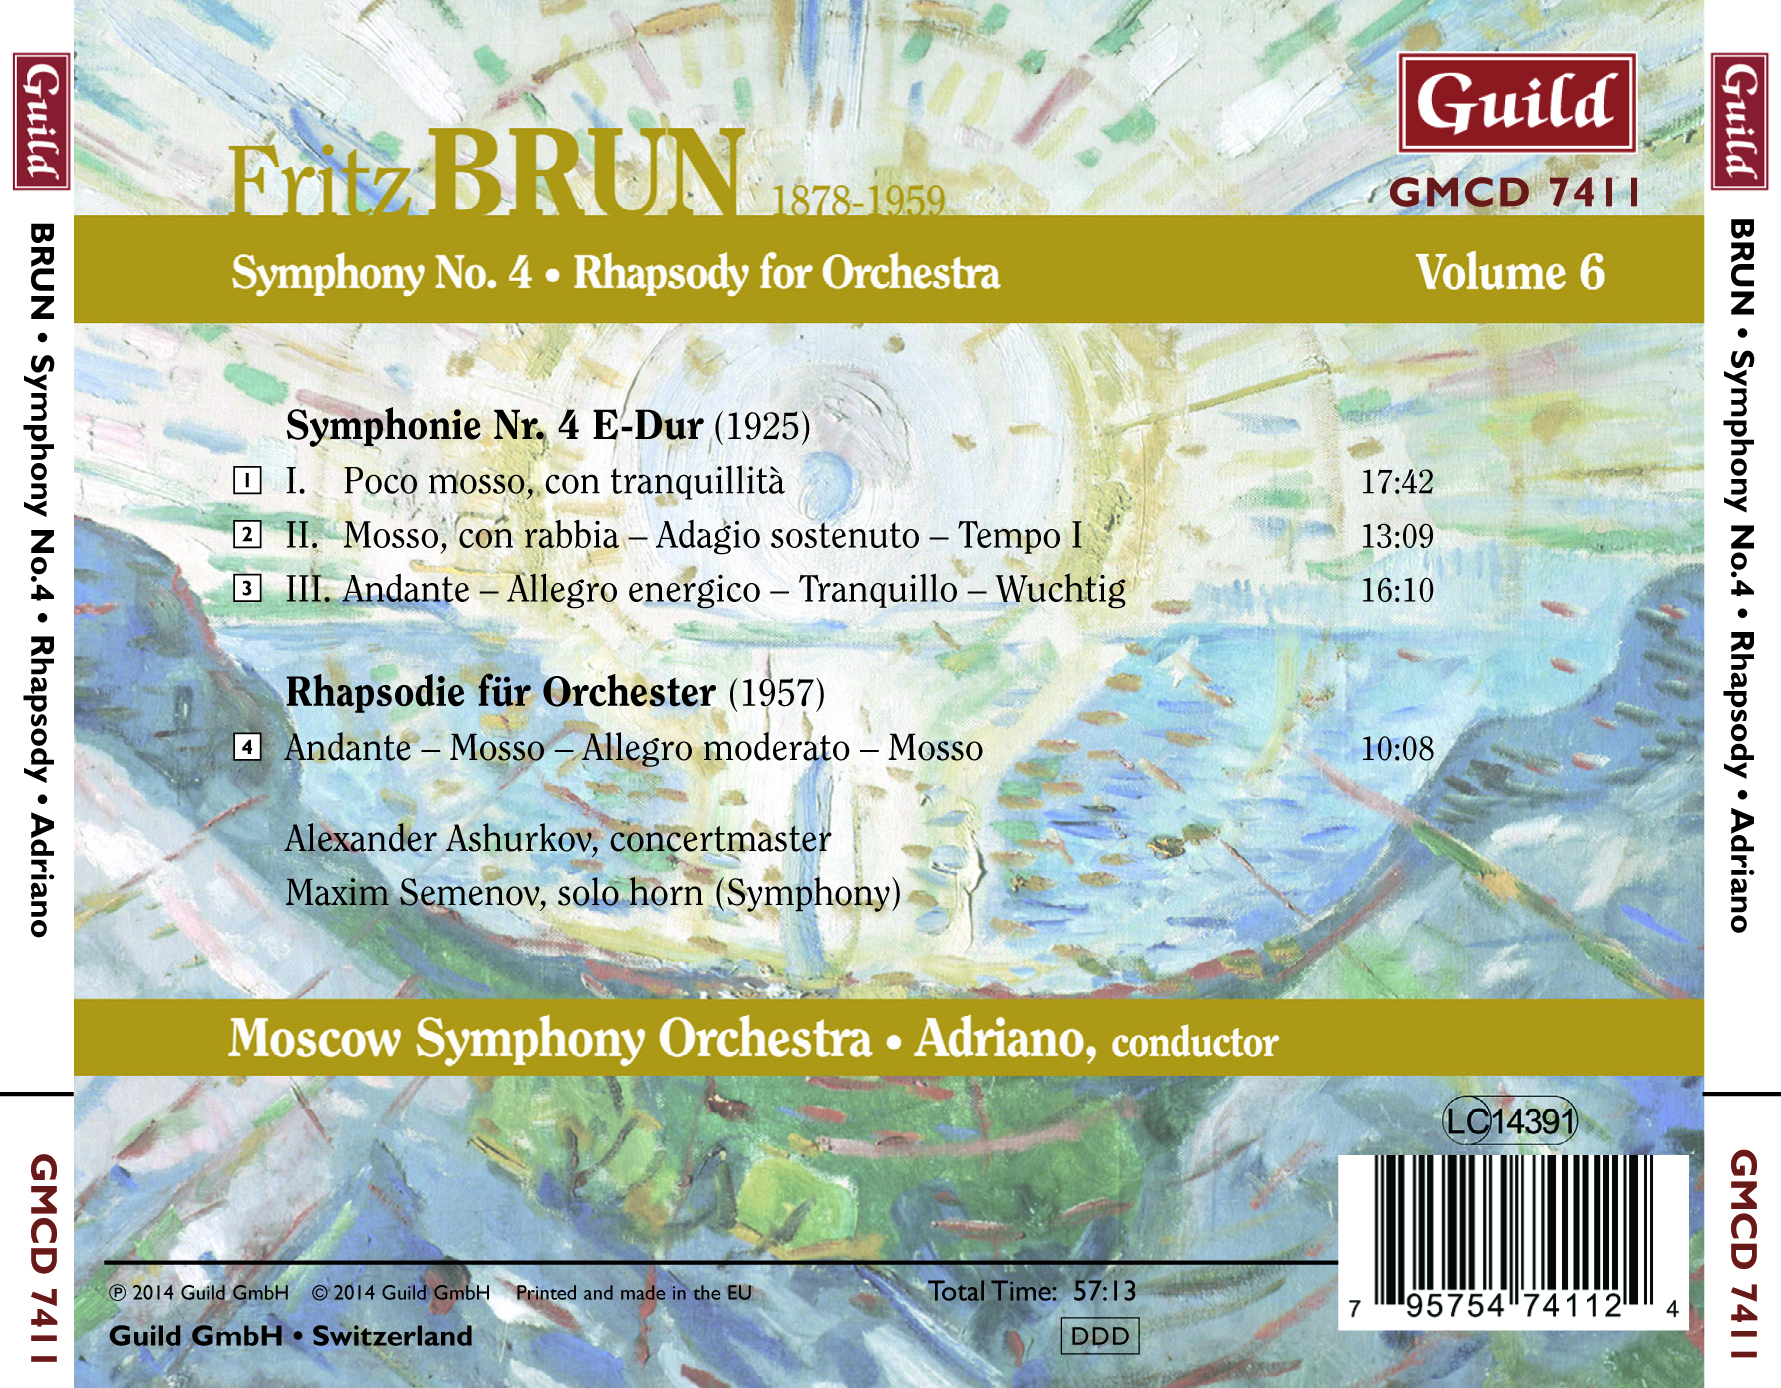 Fritz Brun: Symphony No. 4; Rhapsody for Orchestra Moscow Symphony Orchestra; Adriano, conductor back cover